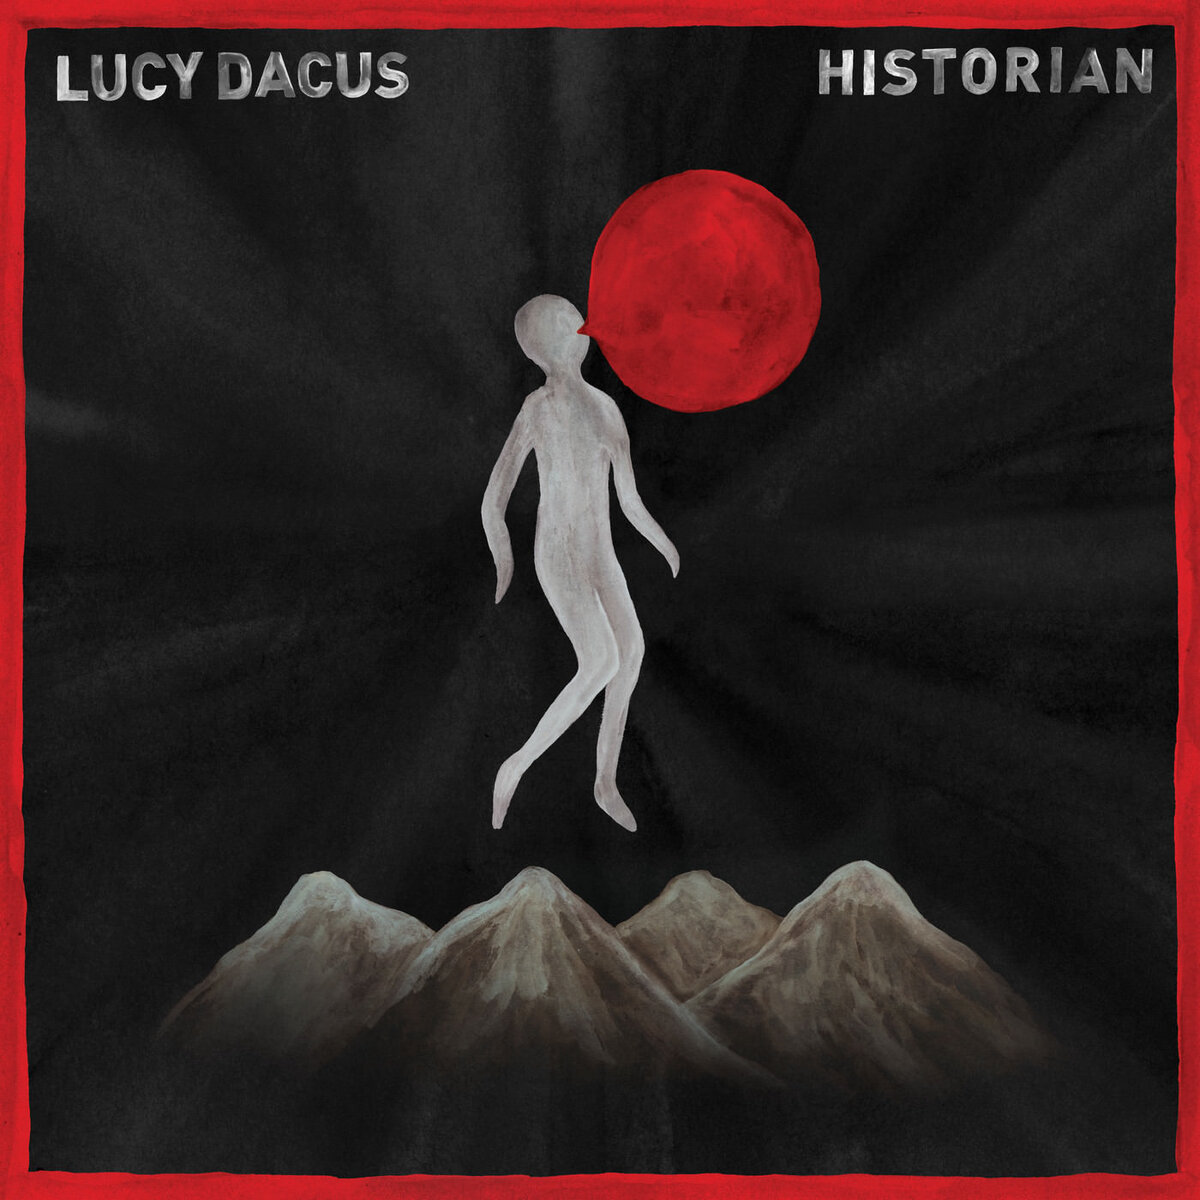 Lucy Dacus, USA, Indie Rock